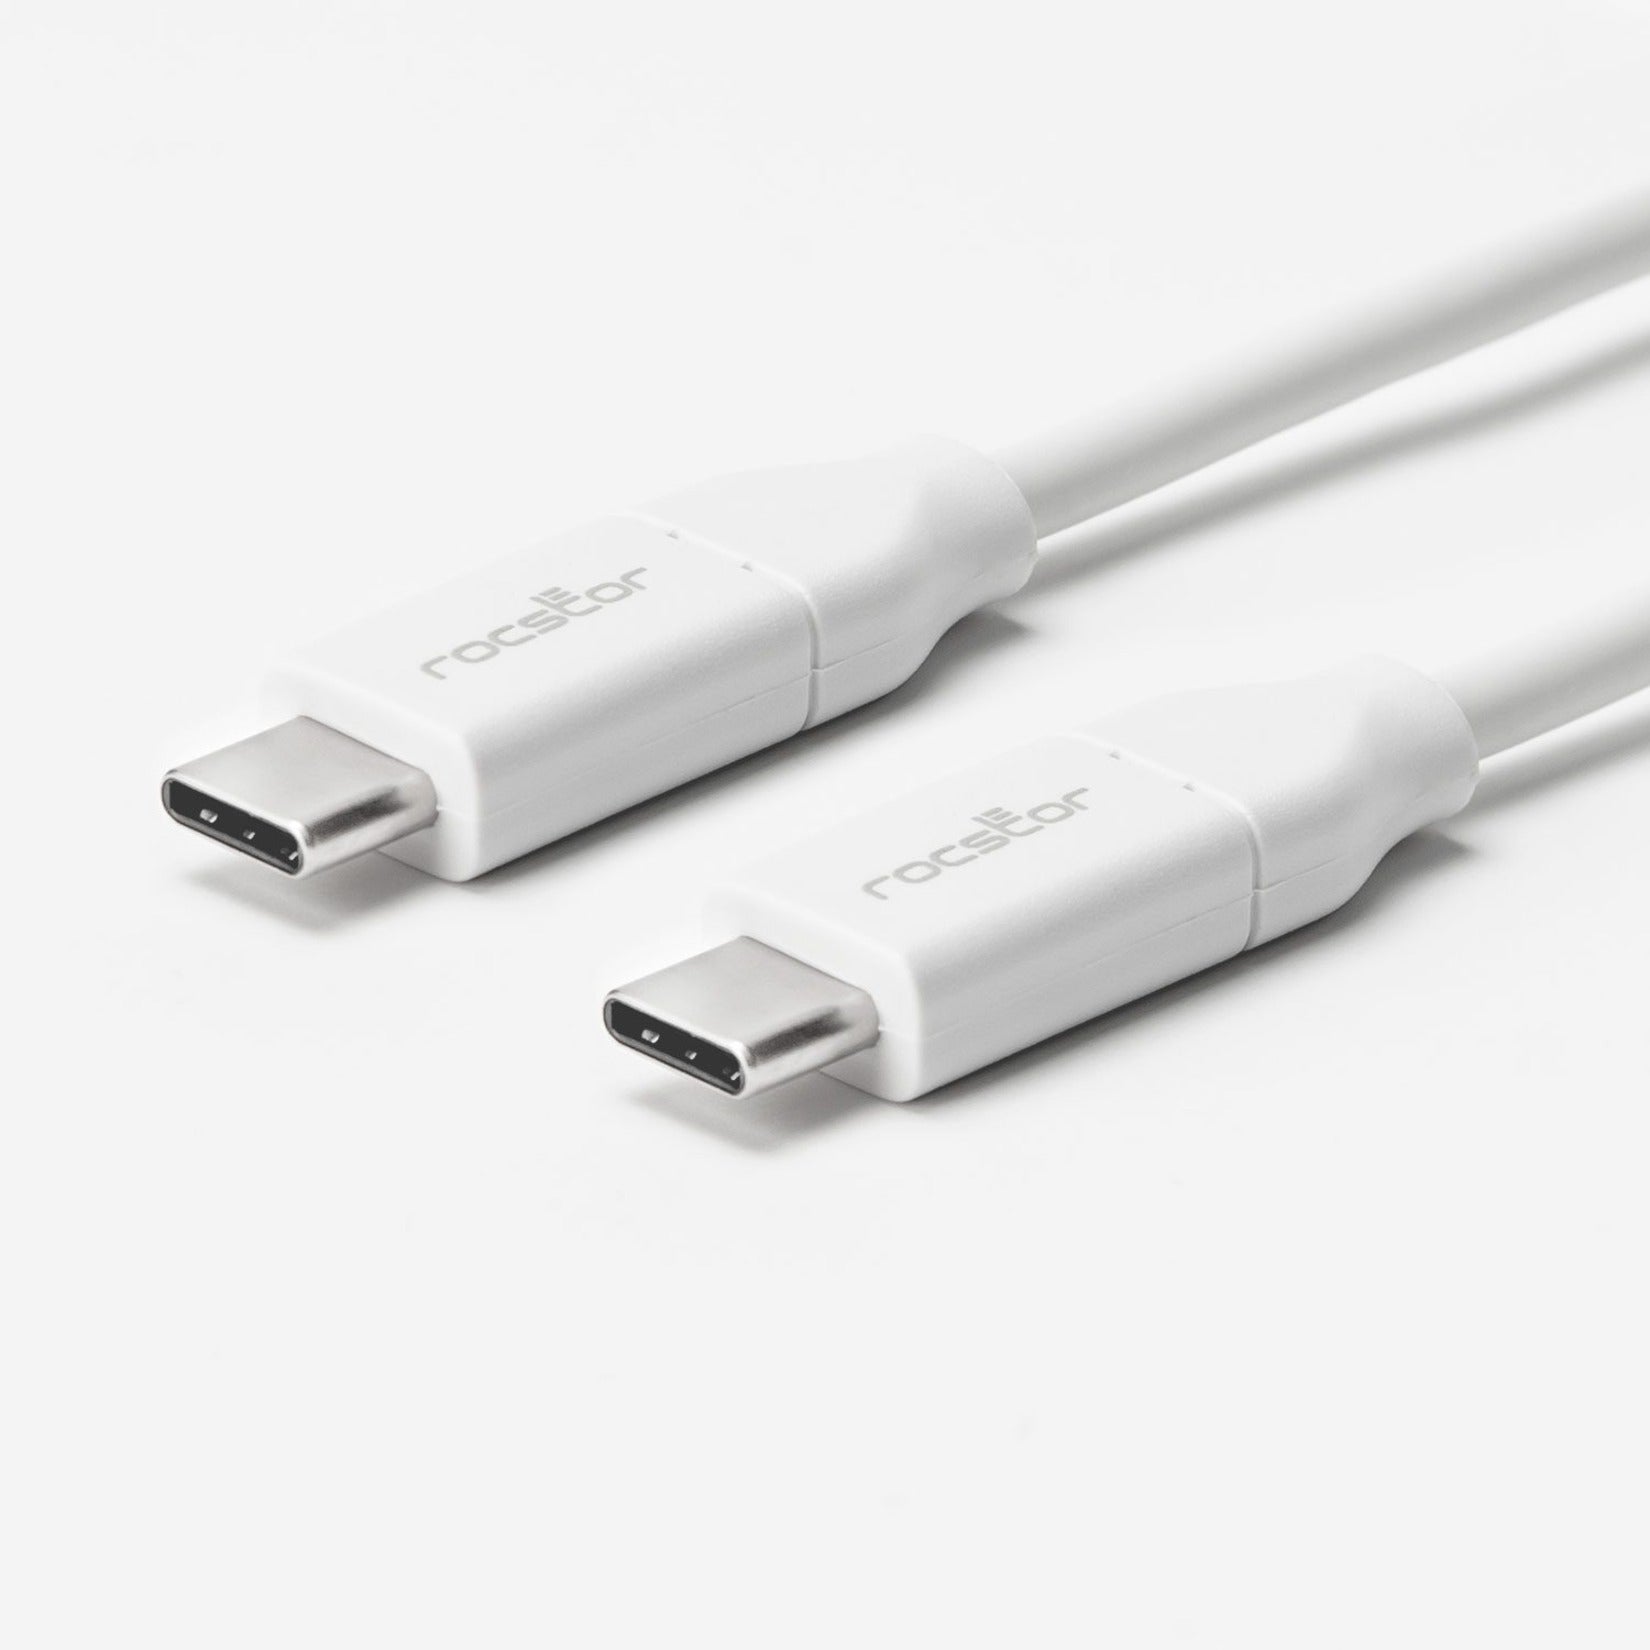 Rocstor Y10C275-W1 Premium USB-C Charging Cable Up to 100W Power Delivery, 10ft, Fast Charging, White